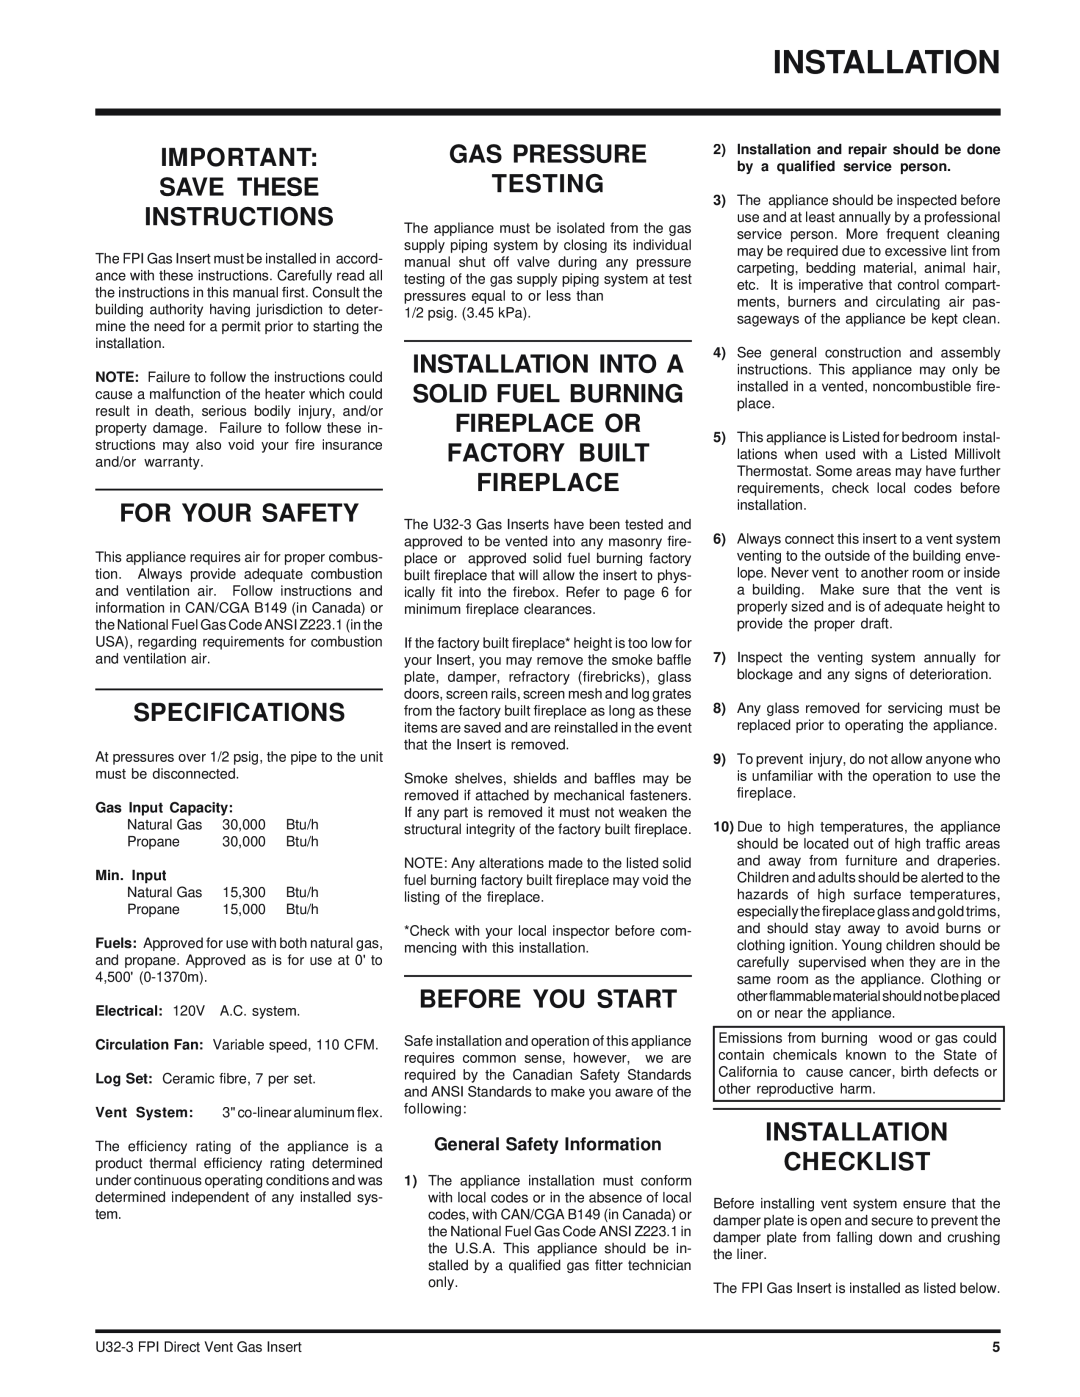 Regency U32-NG3 Save These Instructions, For Your Safety, Specifications, Gas Pressure Testing, Before You Start 